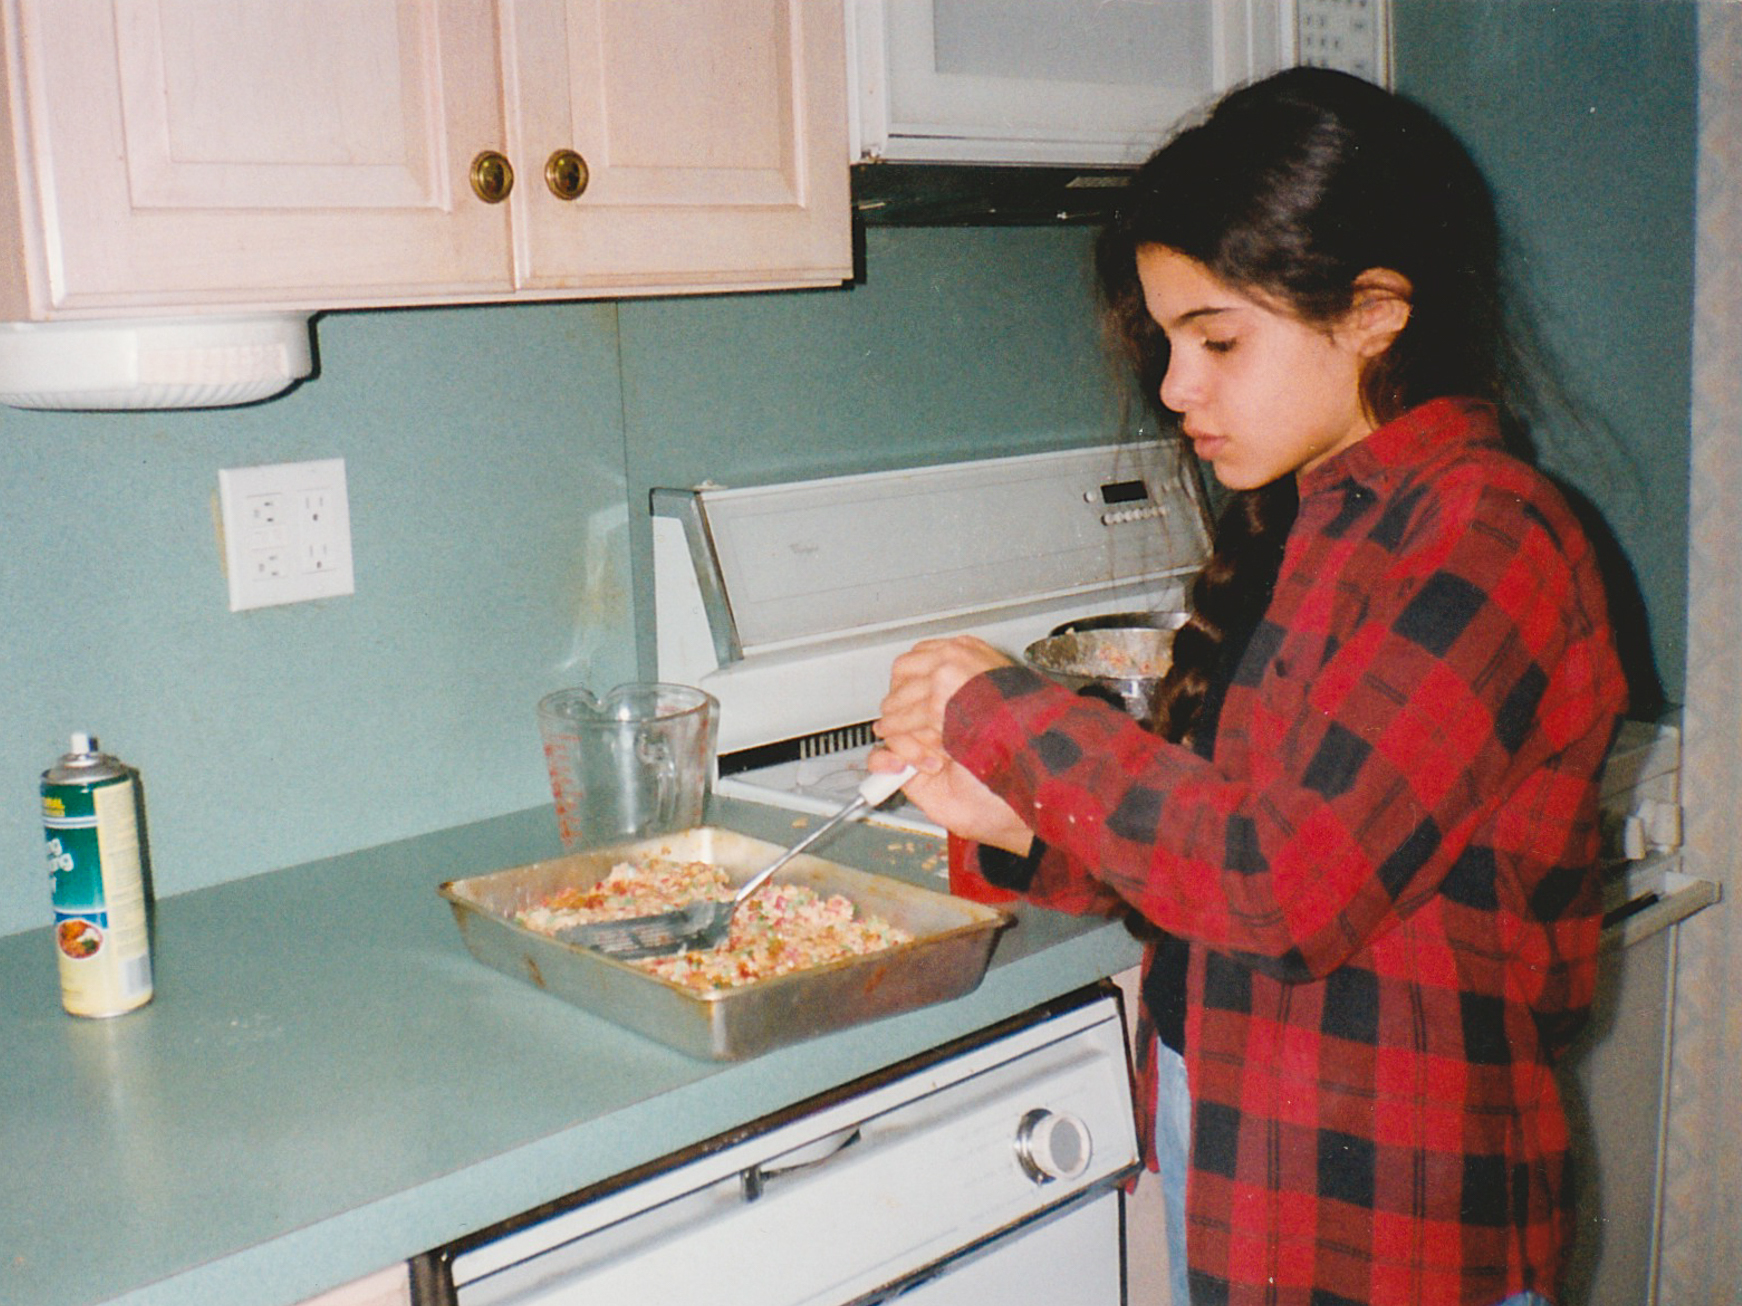 Liz Alpern baking Rice Krispies treats as a child. Alpern was one of the storytellers at Schmaltzy. She says growing up, her Long Island family was not known for cooking. "We made cookies that you sliced and put in the oven. That was baking."